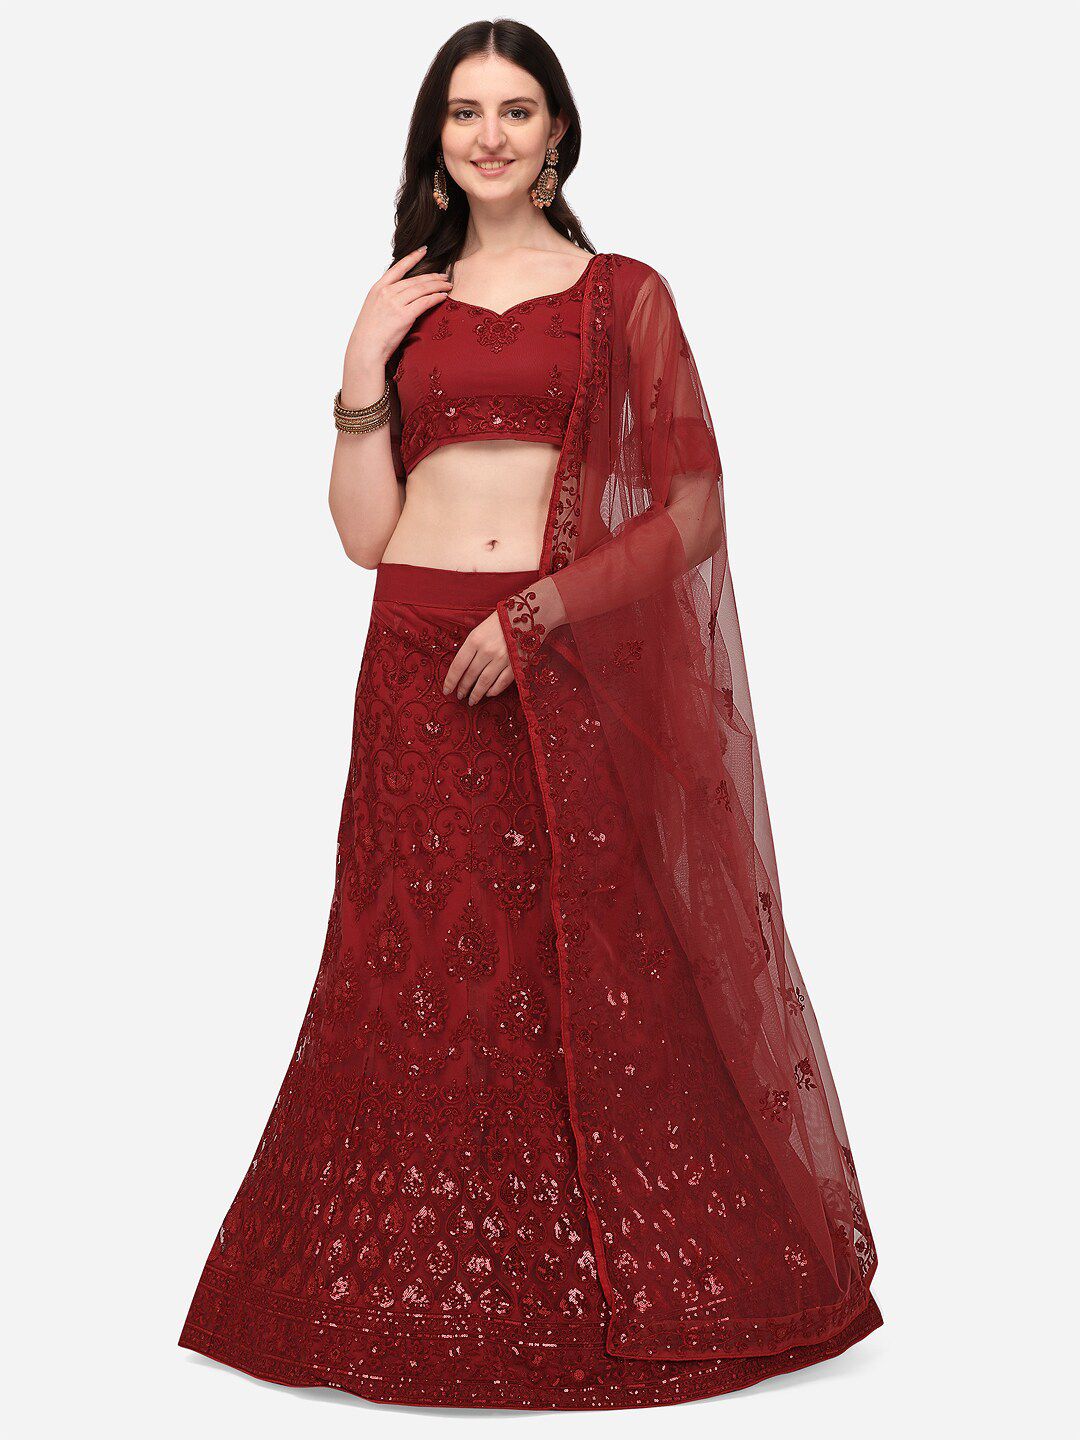 RAJGRANTH Maroon Embellished Semi-Stitched Lehenga & Unstitched Blouse With Dupatta Price in India